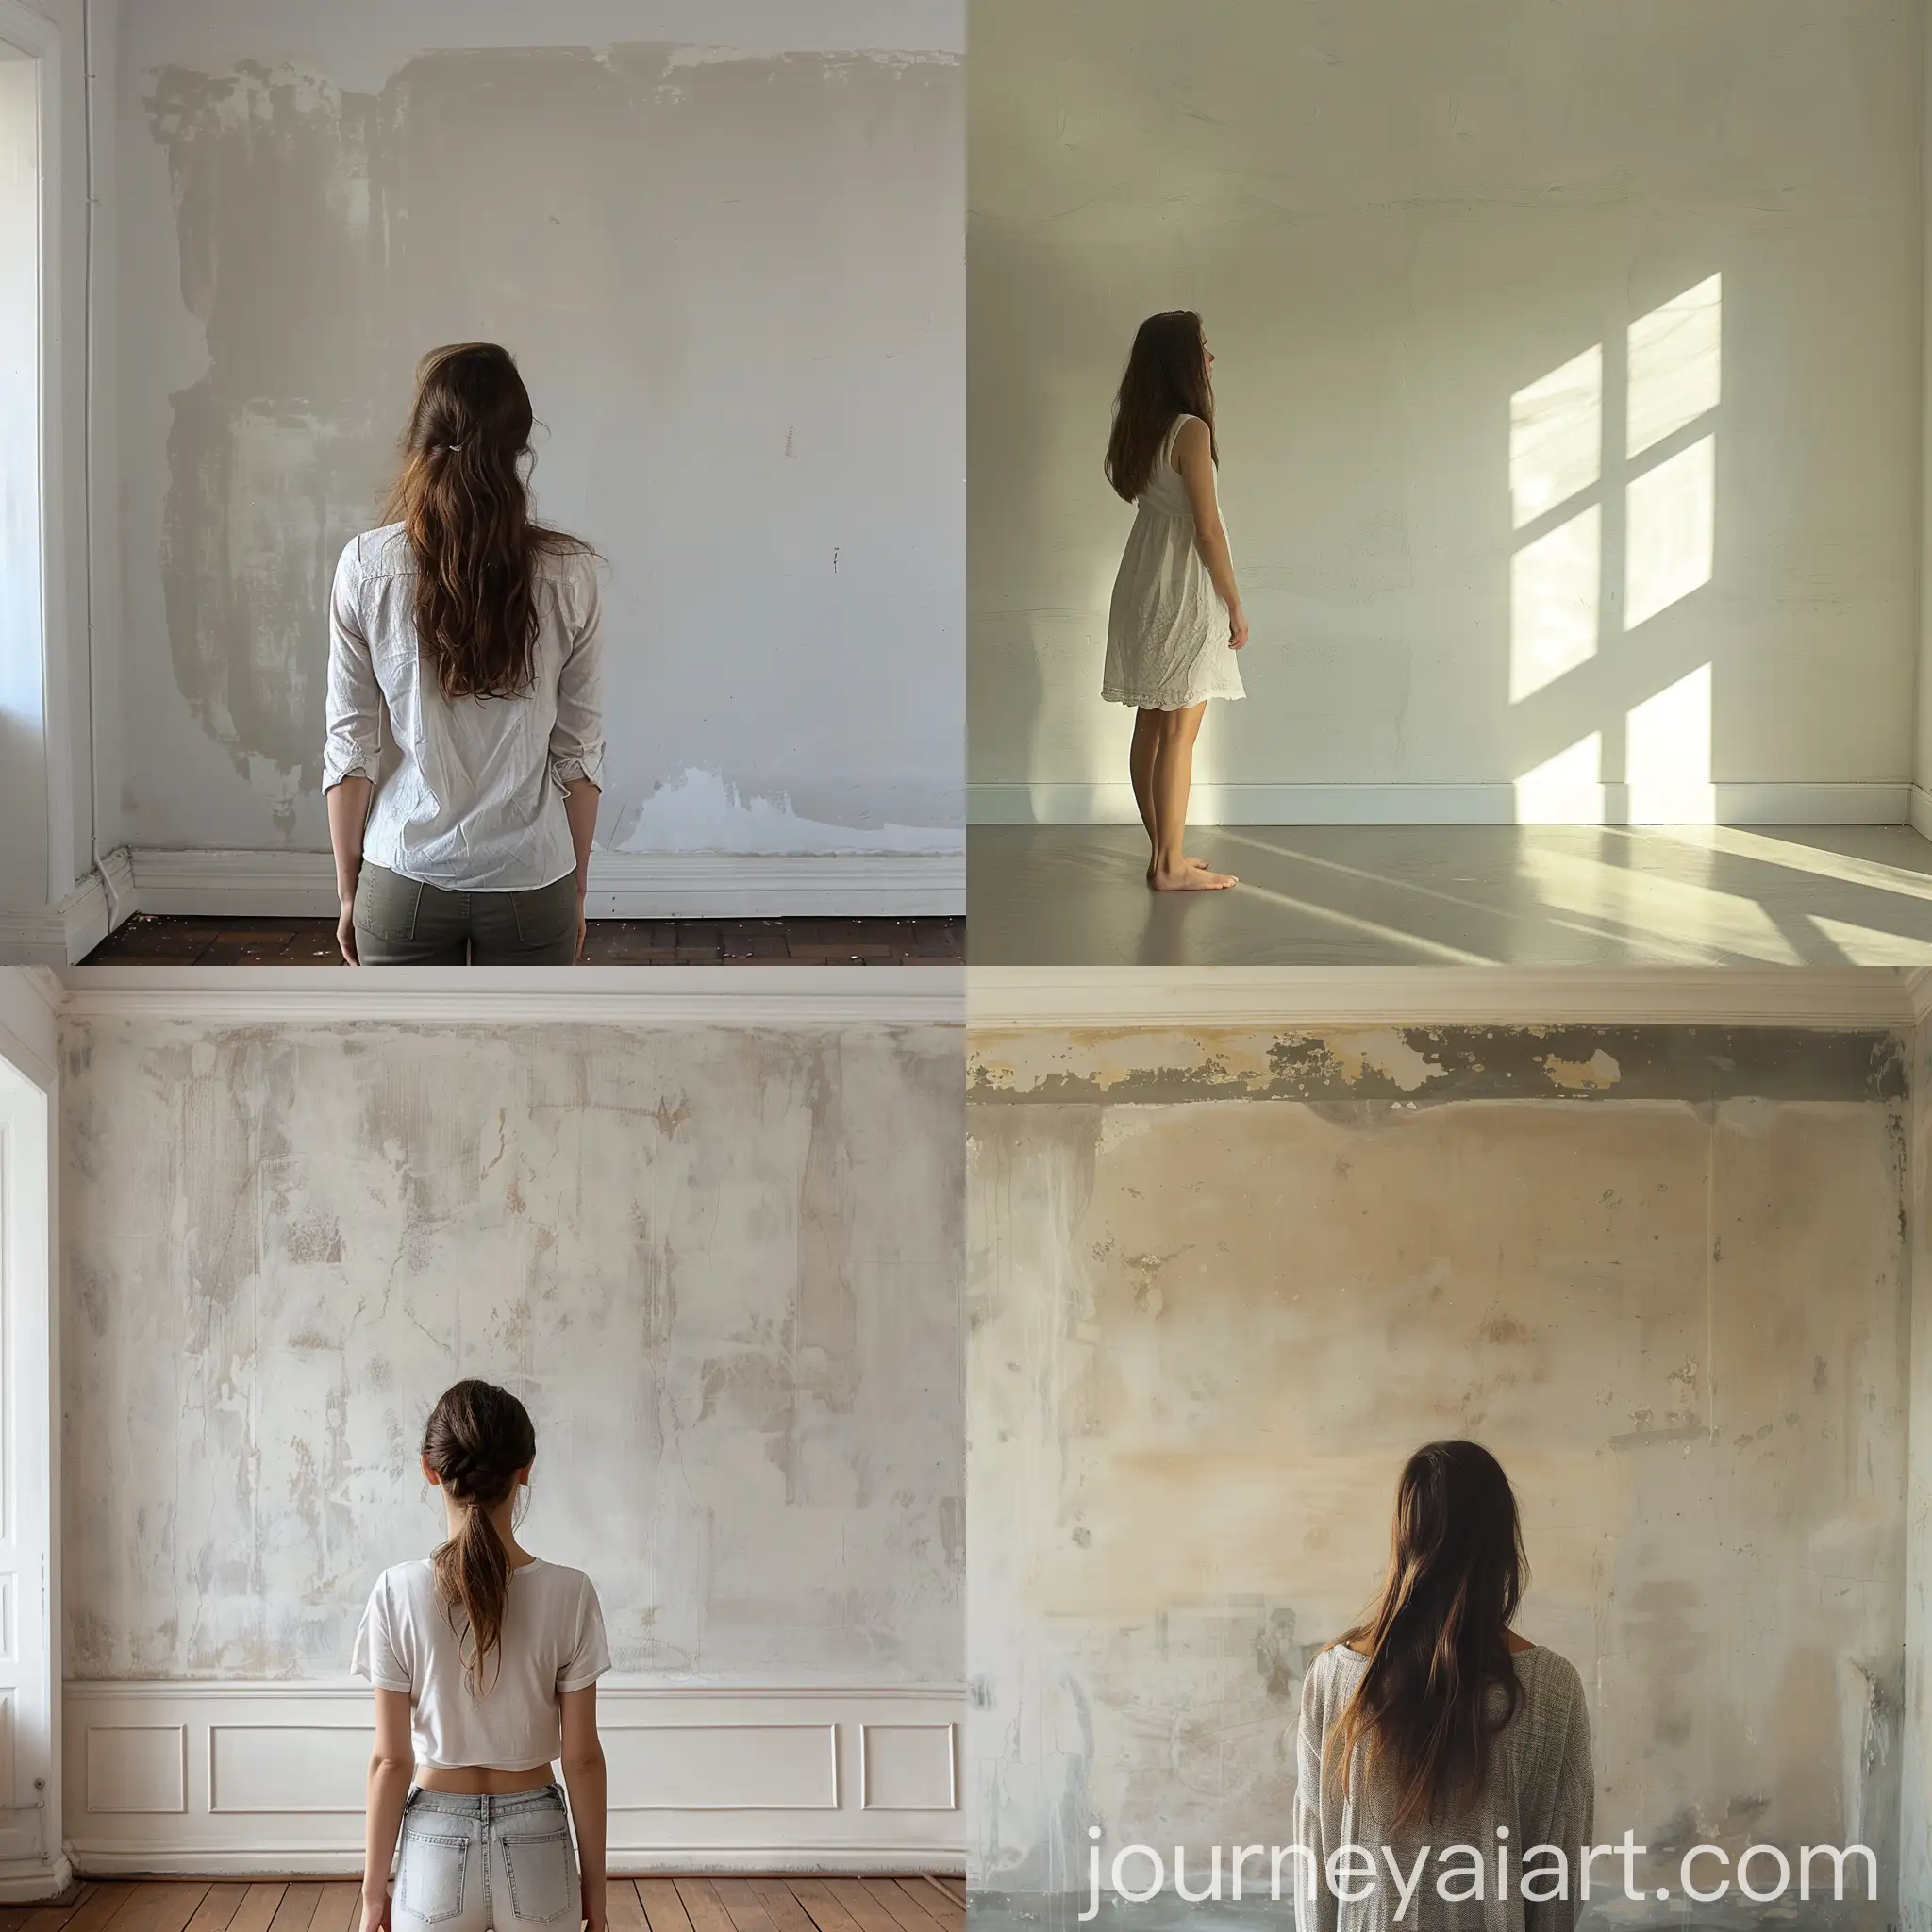 Young-Girl-Contemplating-Empty-Room-in-Clean-House